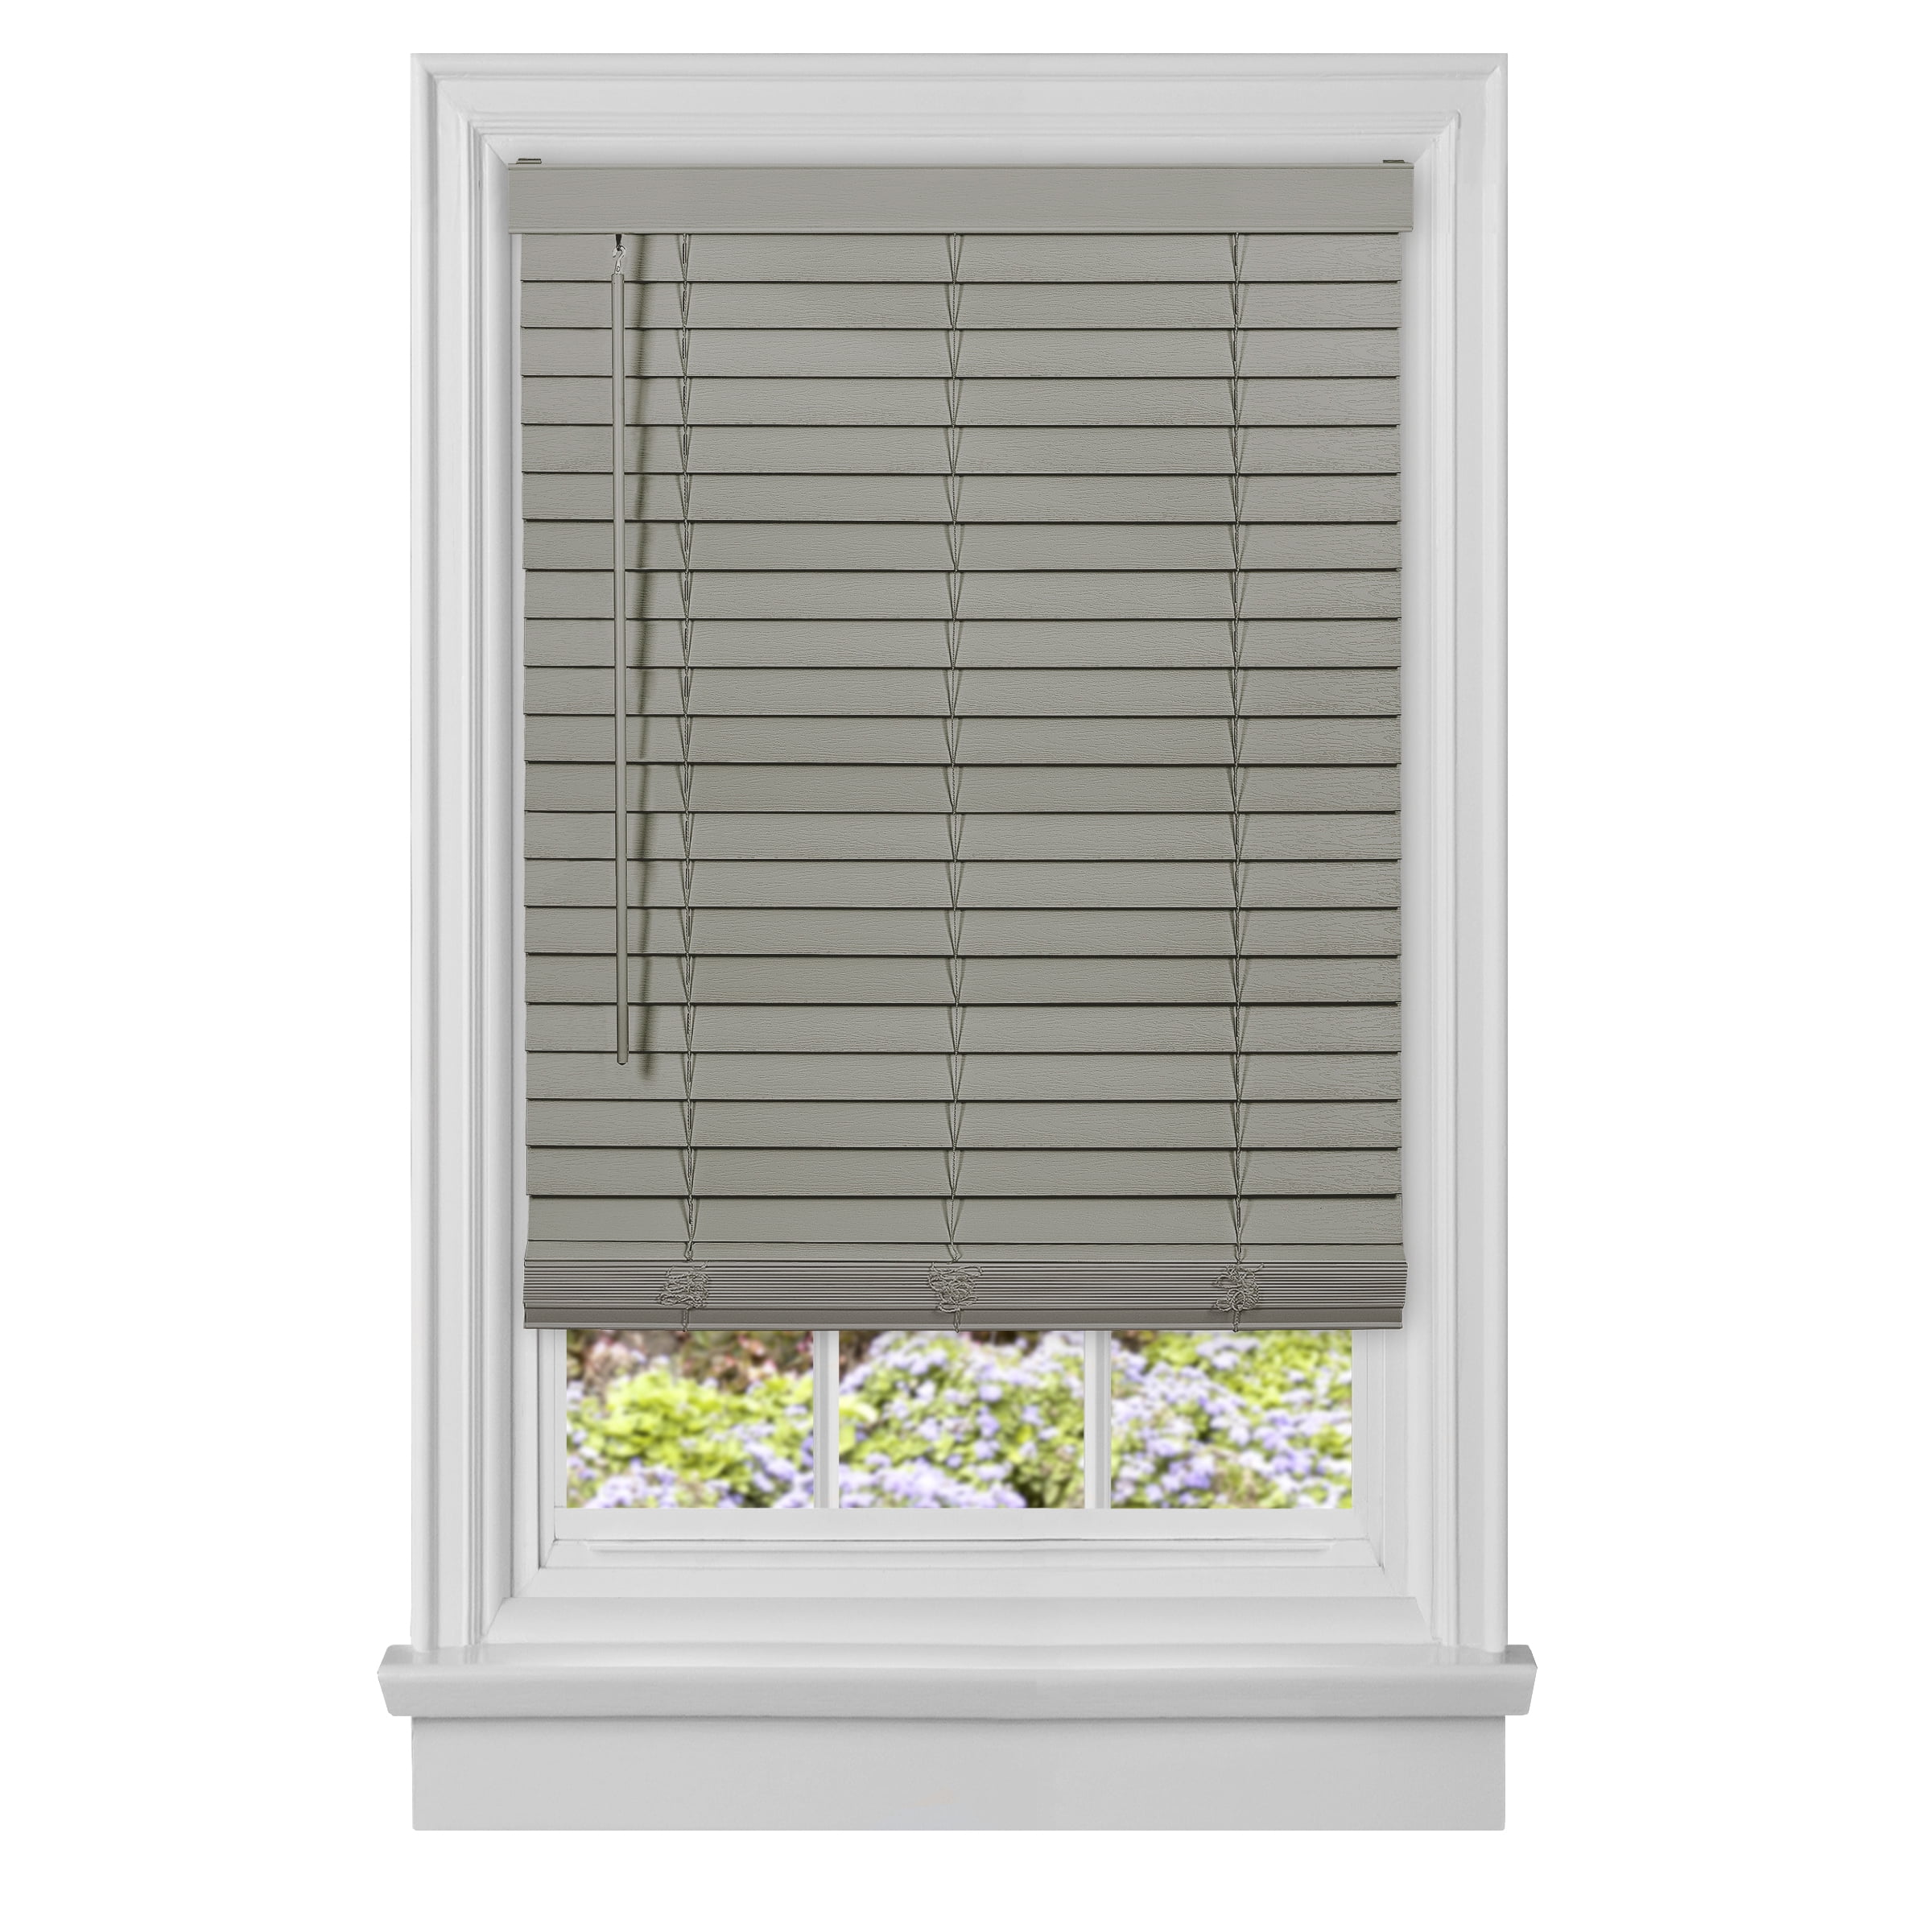 Picture of Achim MFG246GY02 46 x 64 in. Cordless GII Madera Falsa 2 in. Faux Wood Plantation Blind - Grey